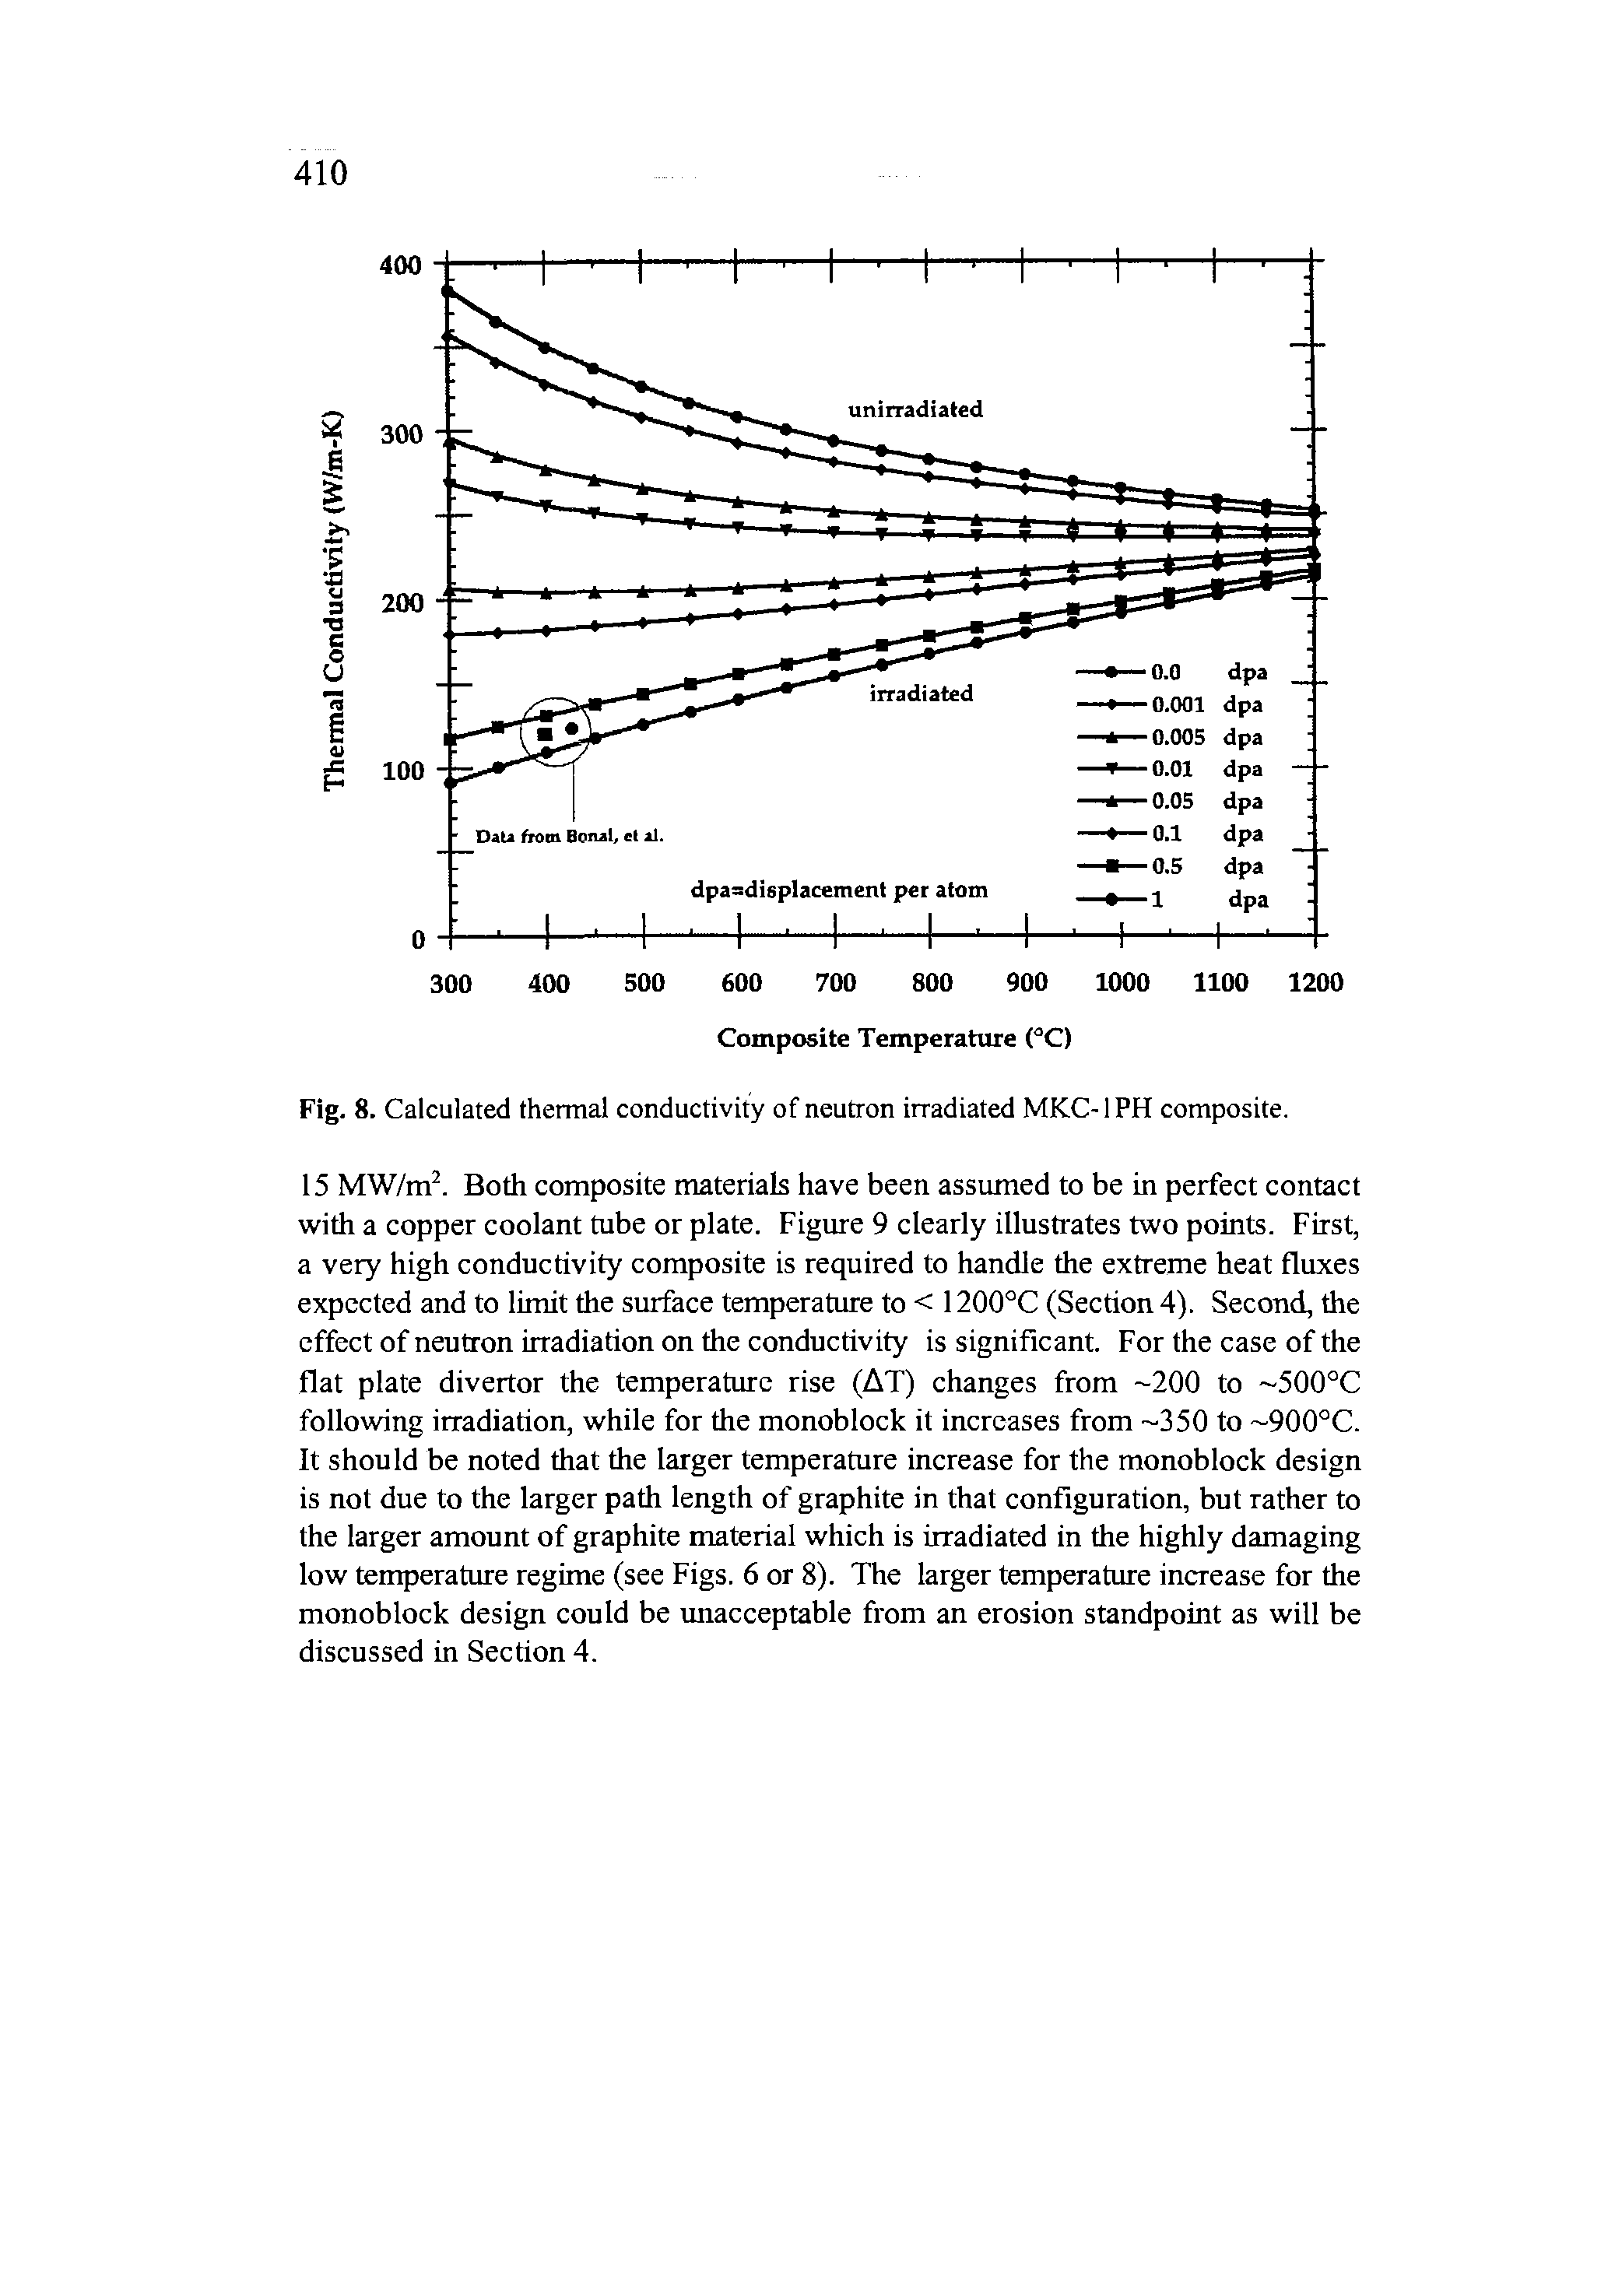 Fig. 8. Calculated thermal conductivity of neutron irradiated MKC-1 PH composite.